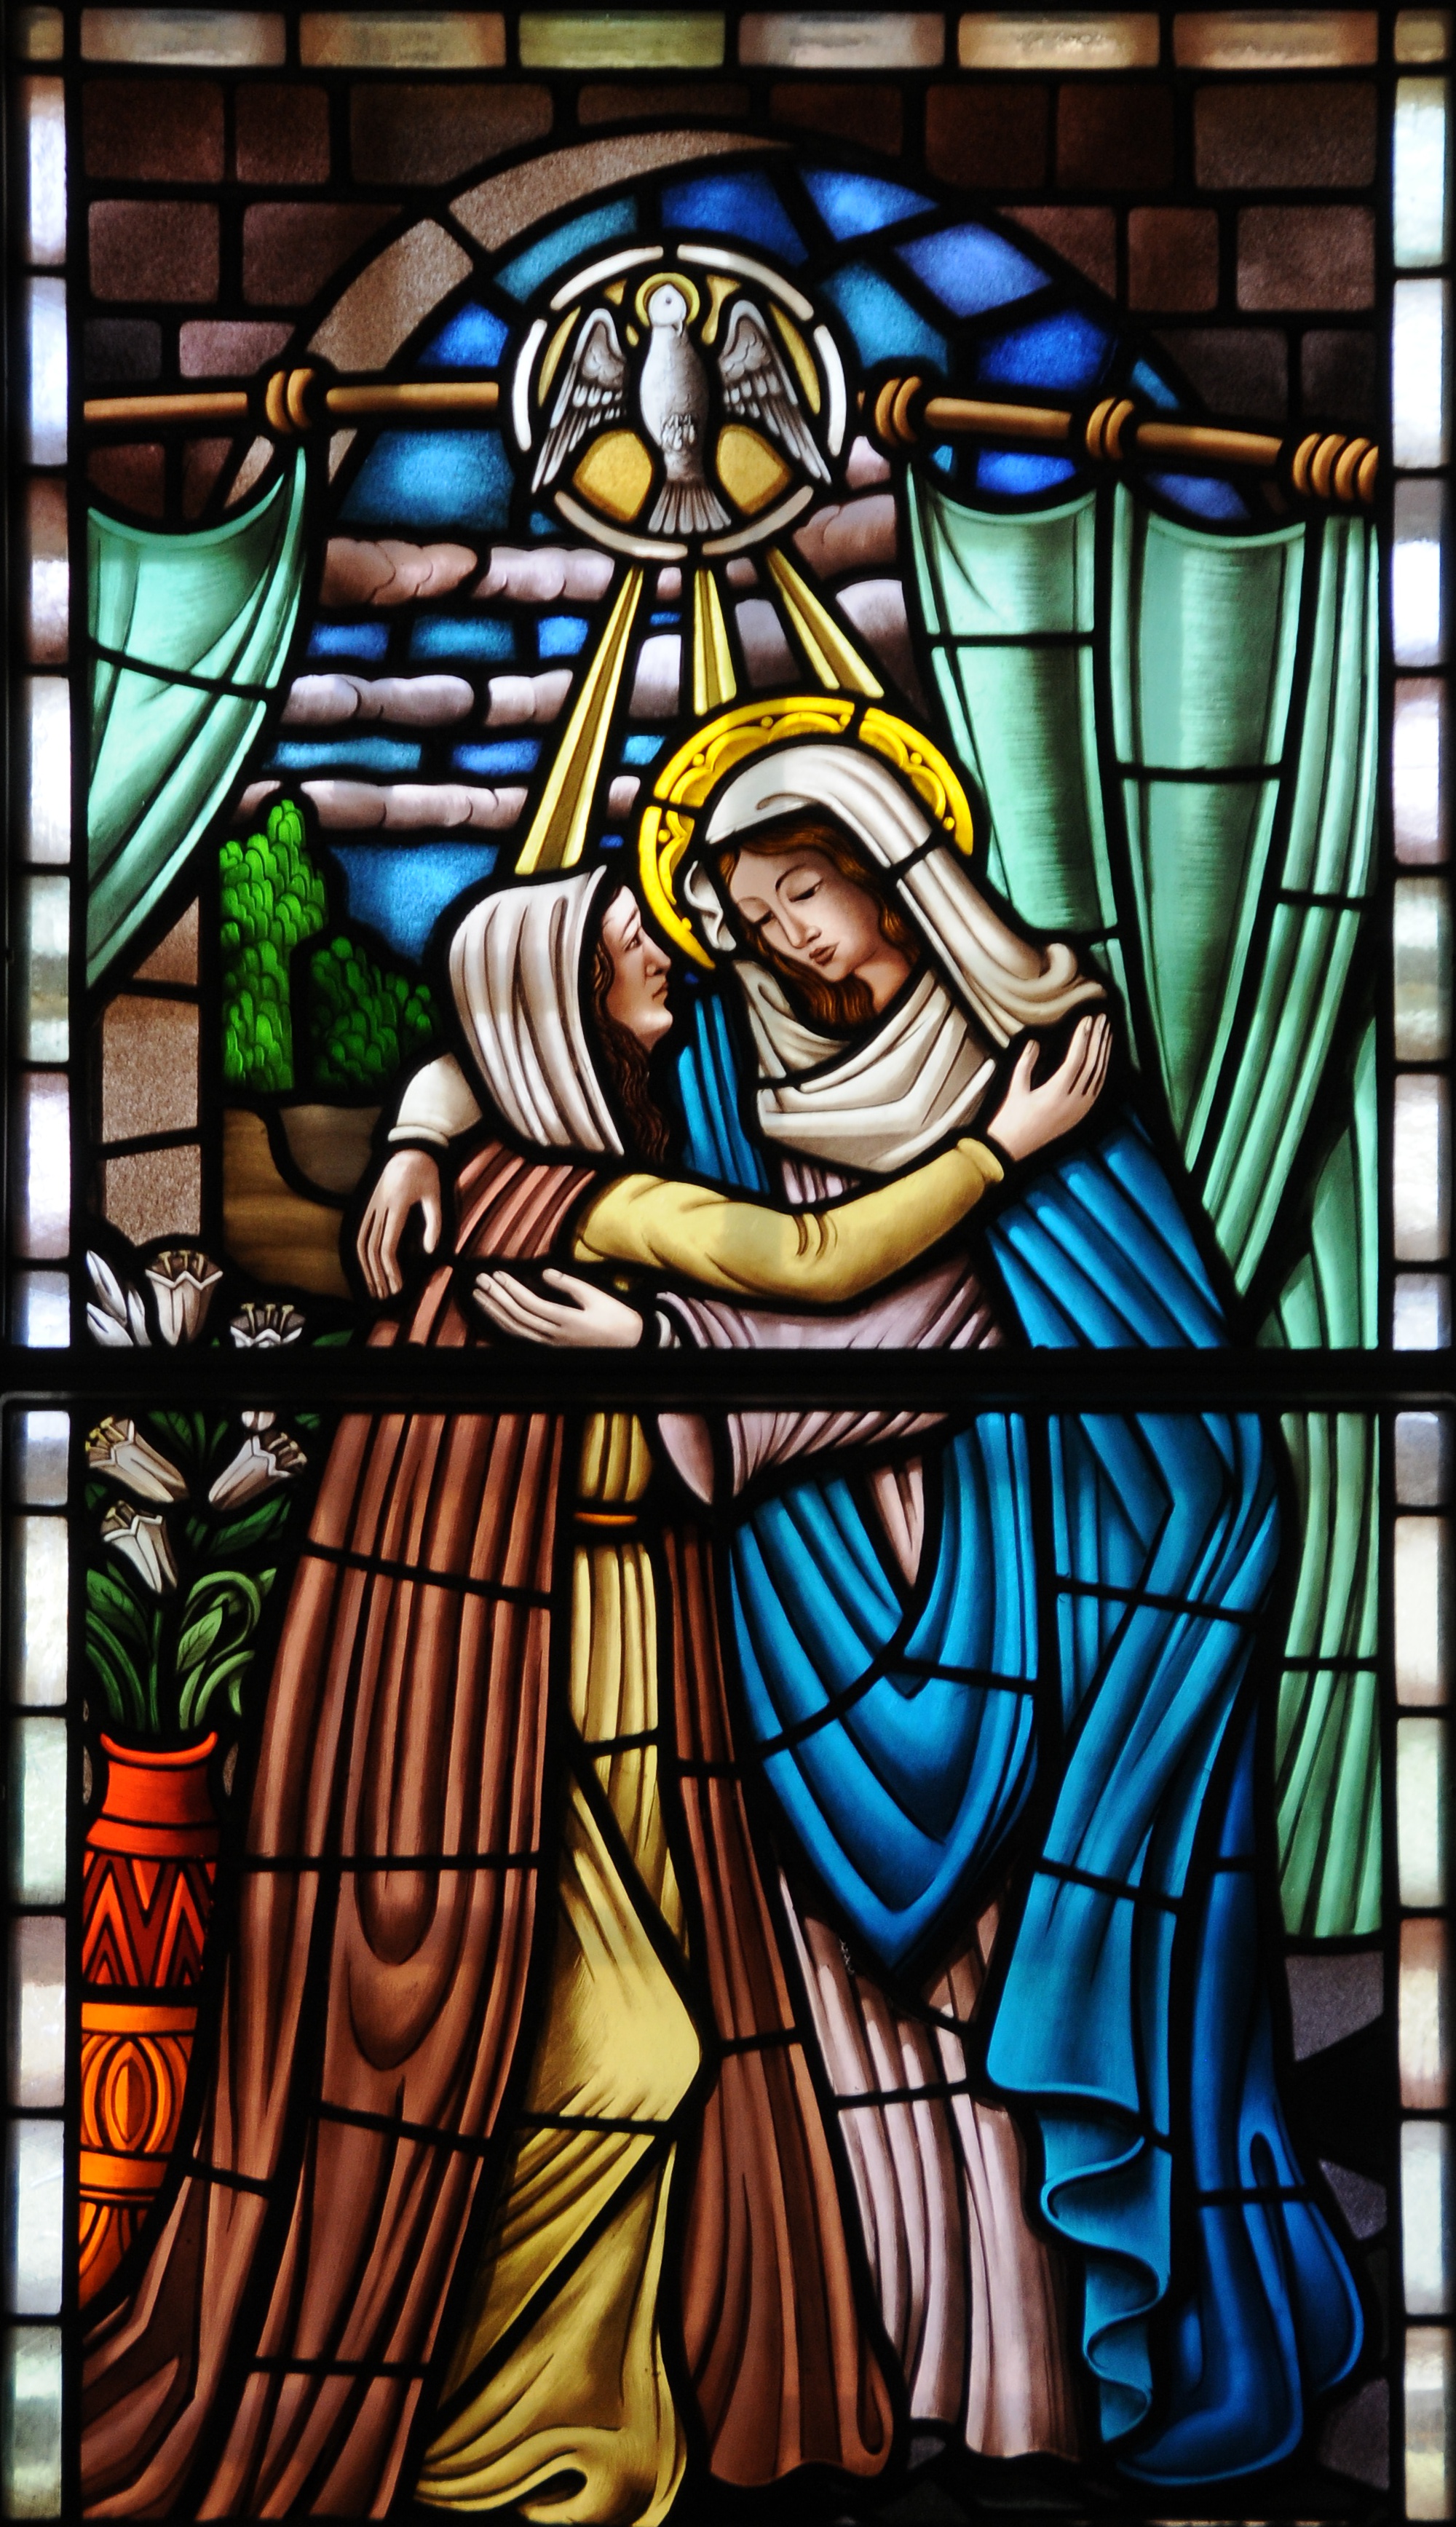  VISITATION OF MARY TO ELIZABETH, STAINED GLASS dans images sacrée